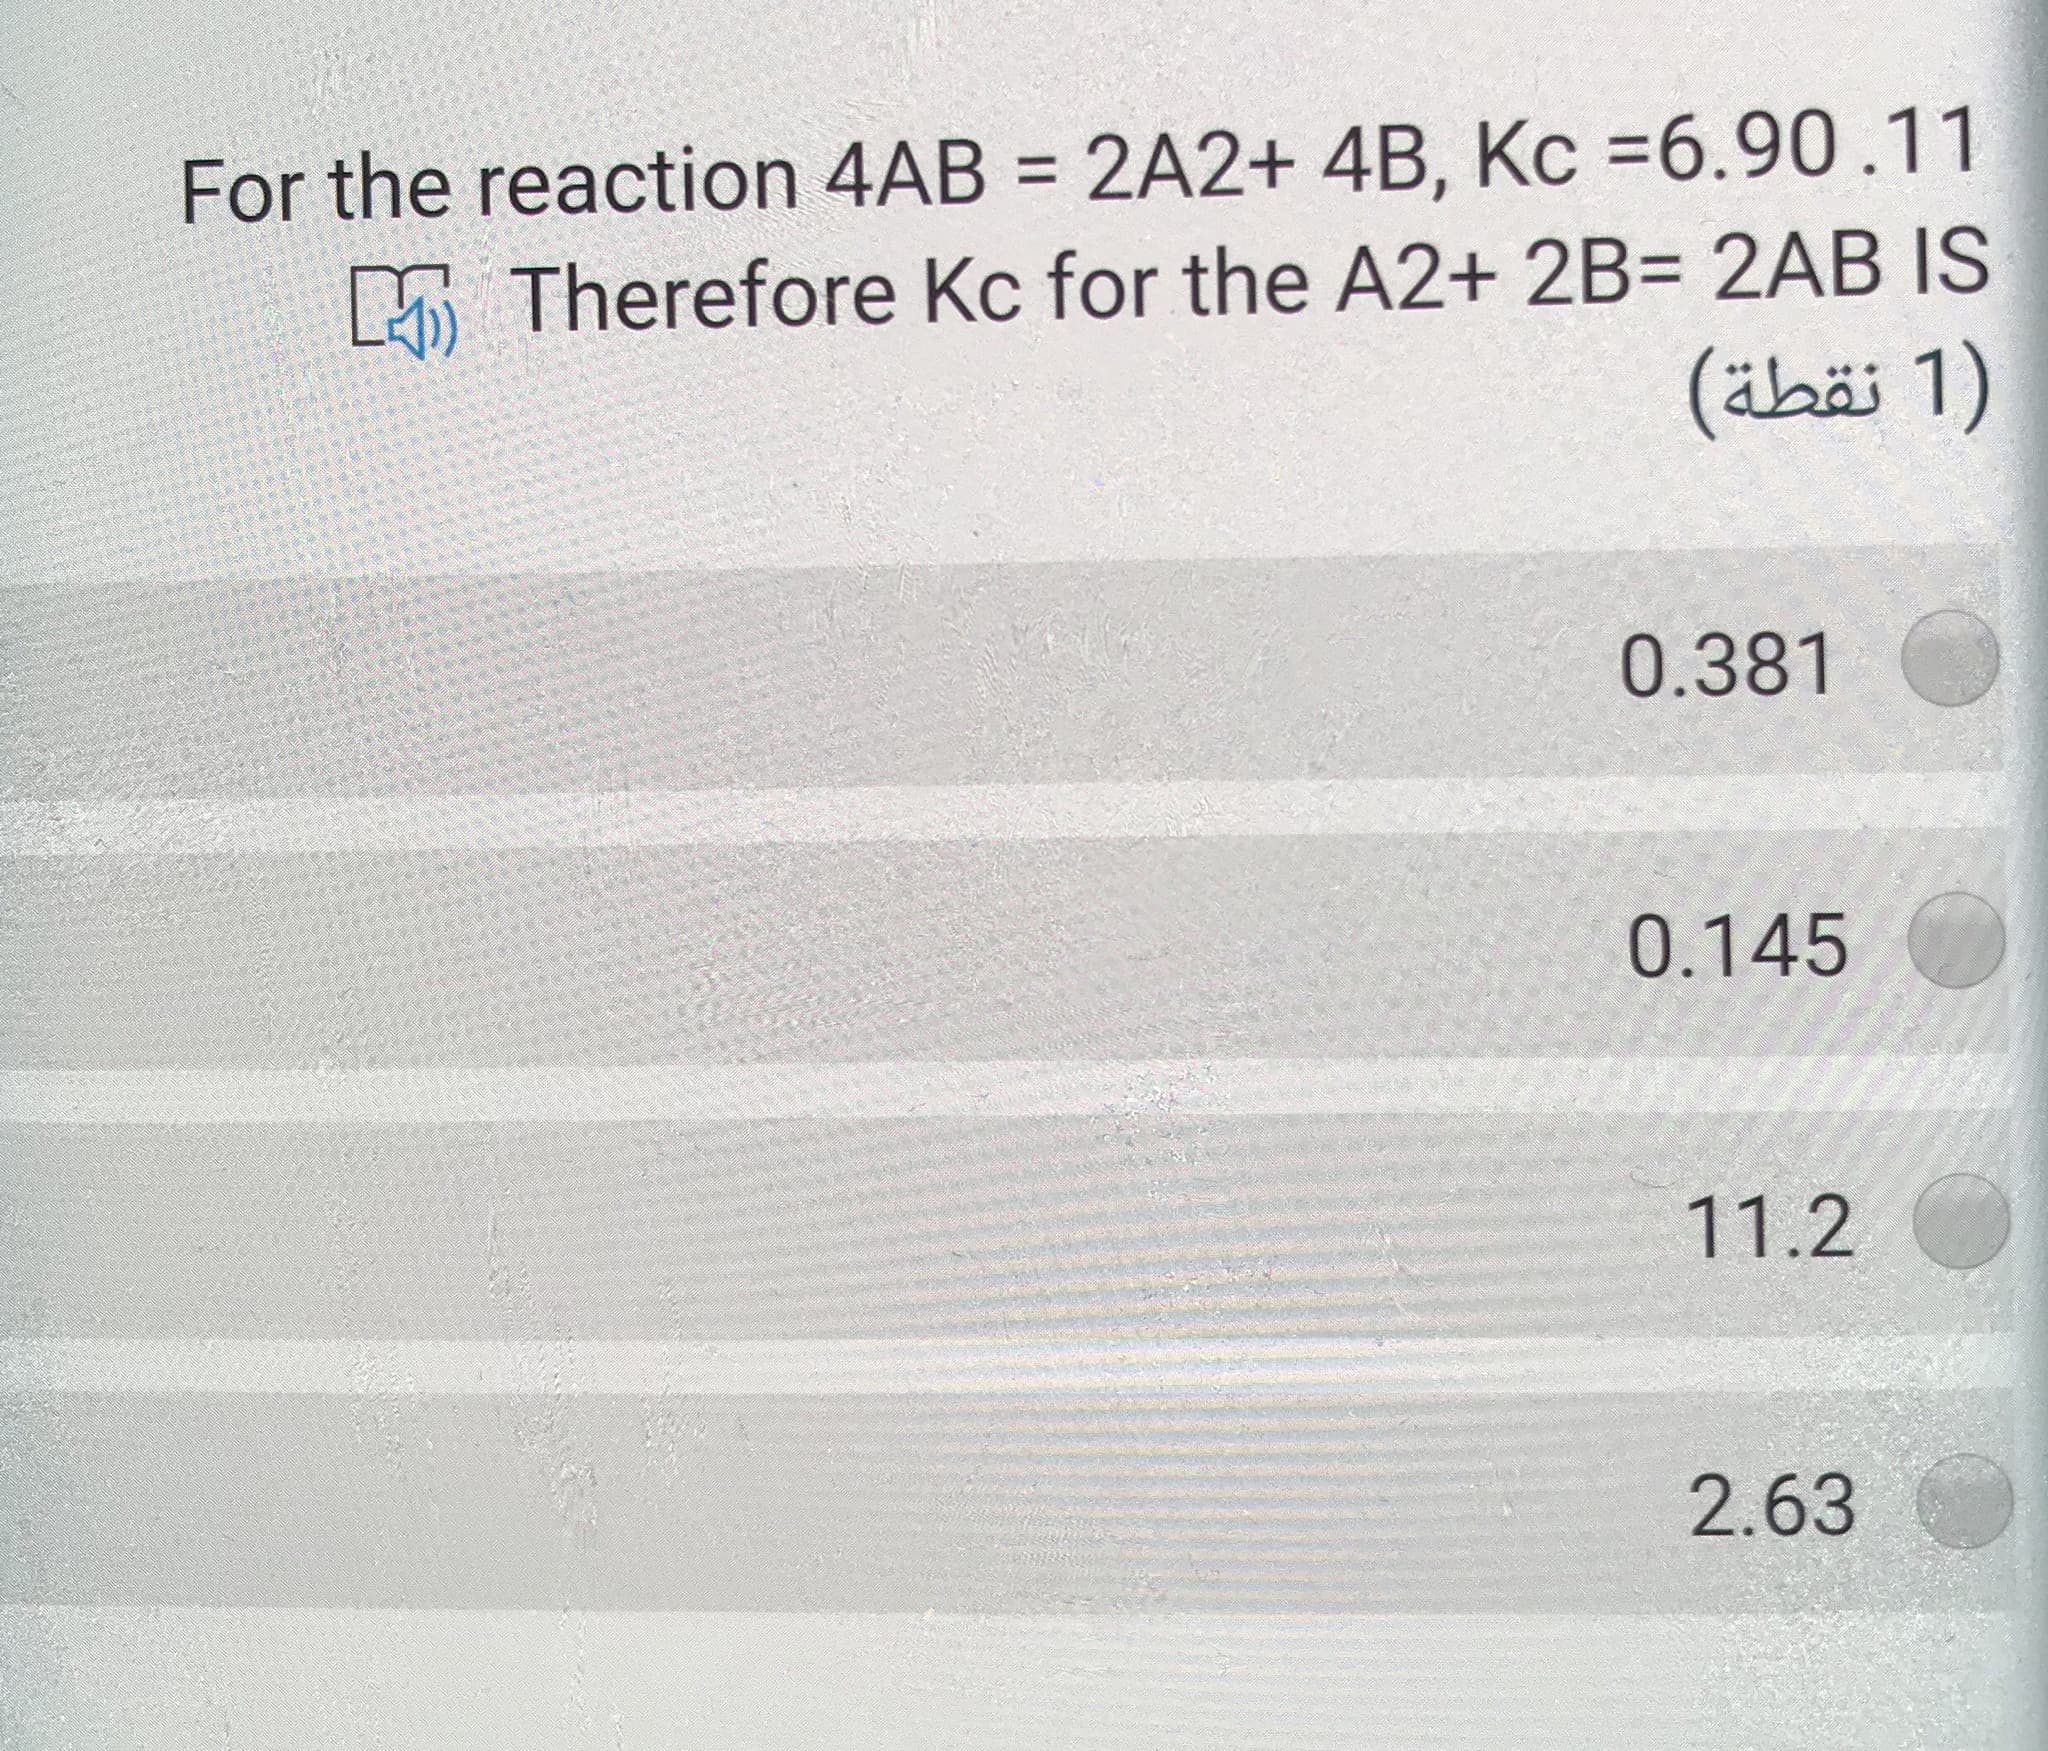 For the reaction 4AB = 2A2+ 4B, Kc =6.90.11
5 Therefore Kc for the A2+ 2B= 2AB IS
(äbäi 1)
0.381
0.145
11.2
2.63
